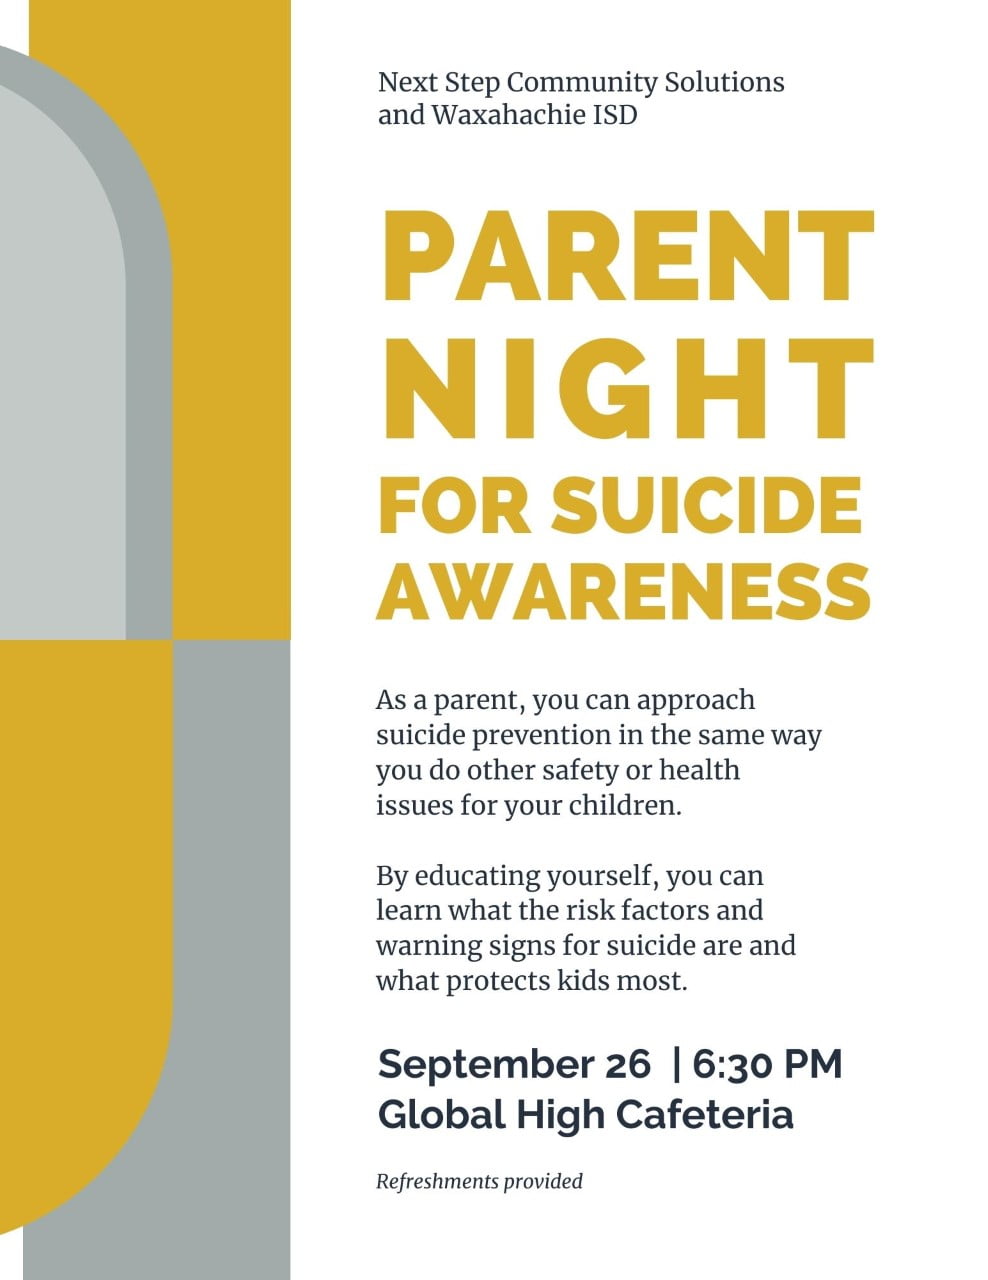 Waxahachie ISD offers resources, discussion strategies during National Suicide Prevention Month 2